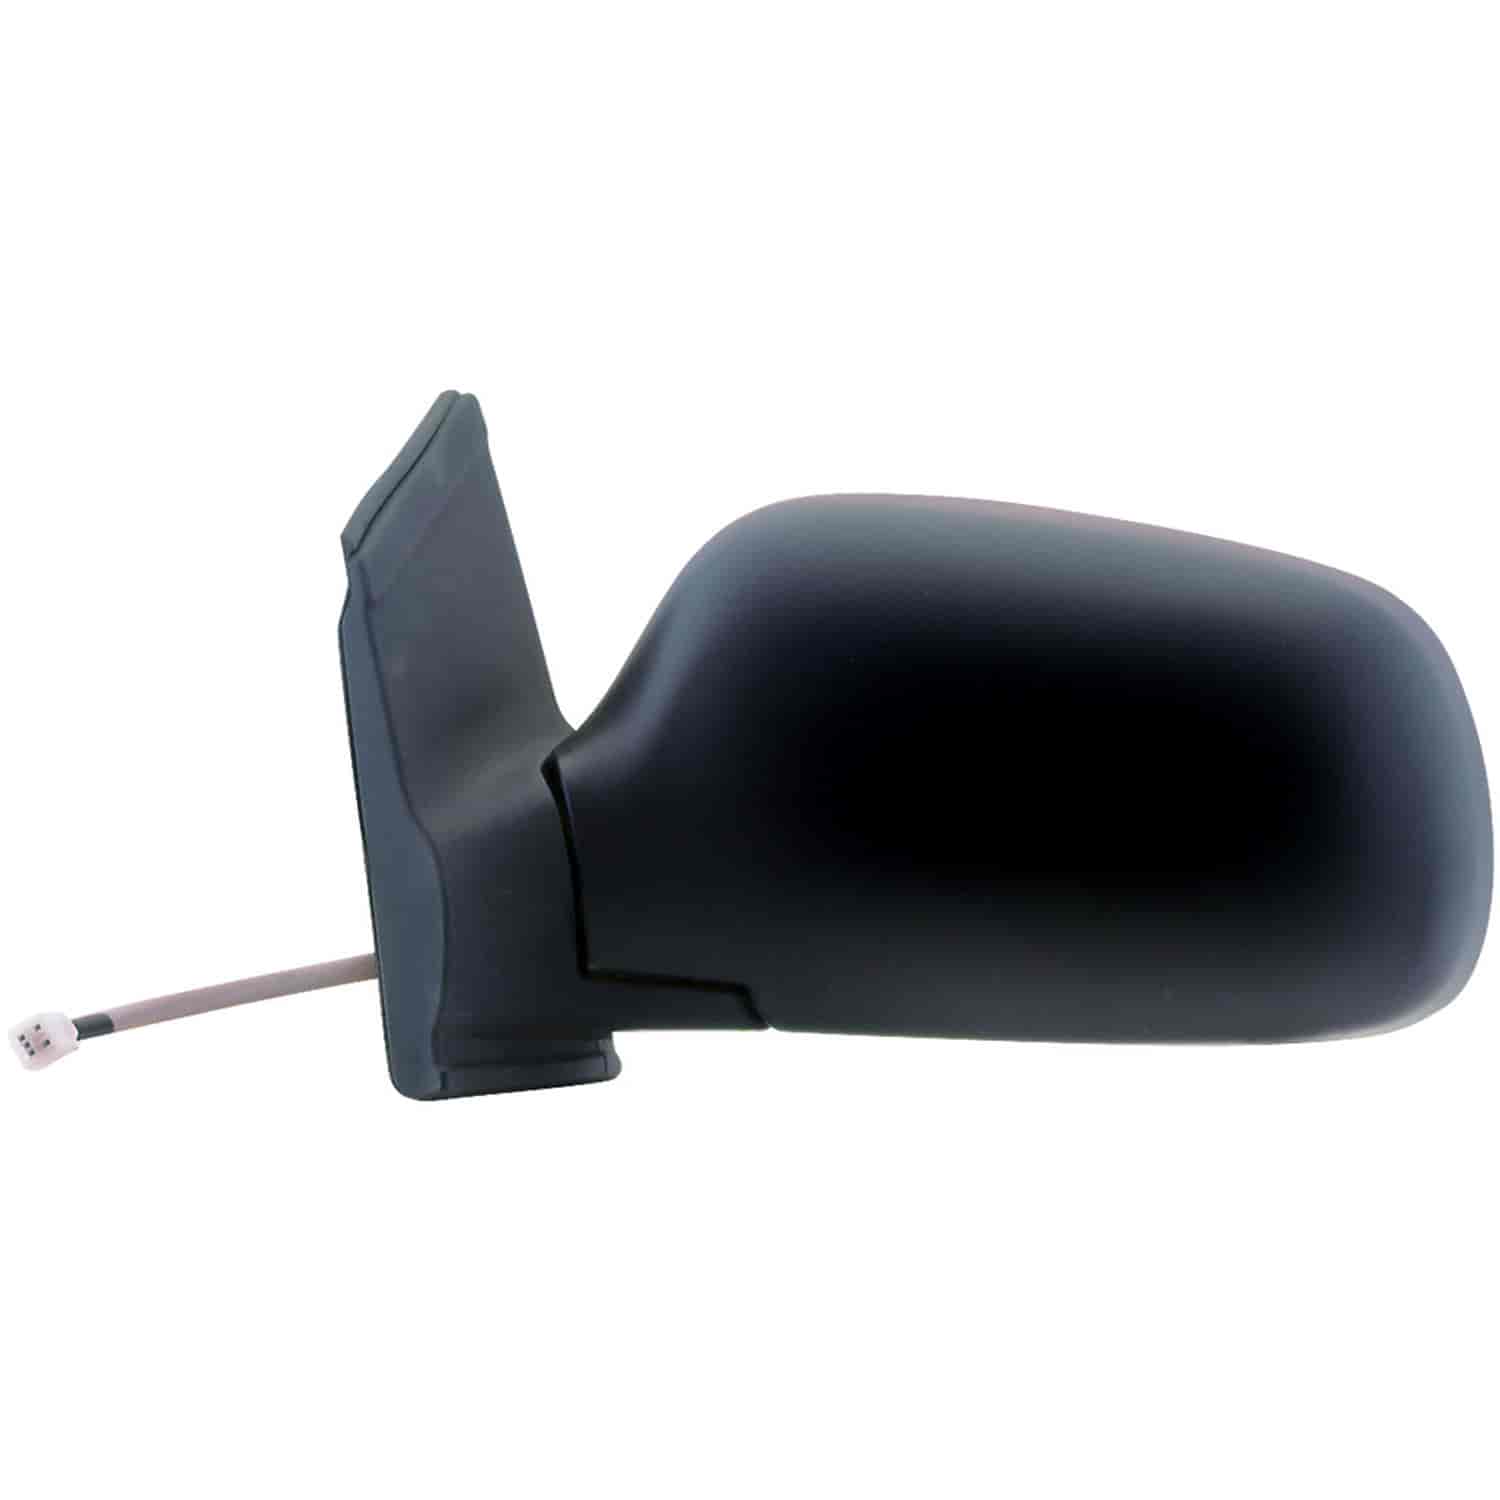 OEM Style Replacement mirror for 98-03 Toyota Sienna driver side mirror tested to fit and function l